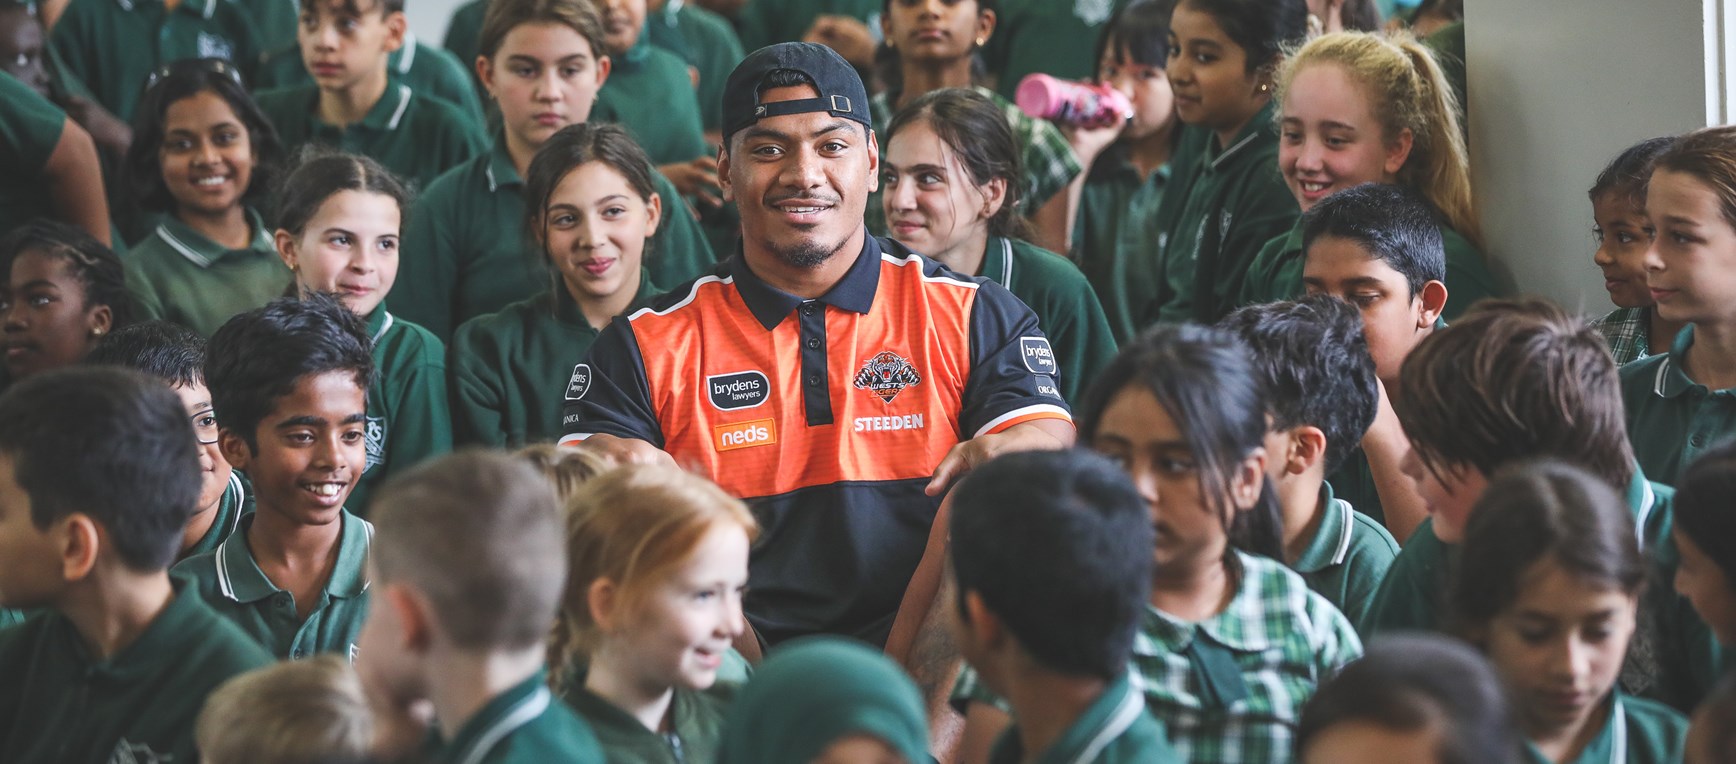 All smiles from Wests Tigers' Community Blitz